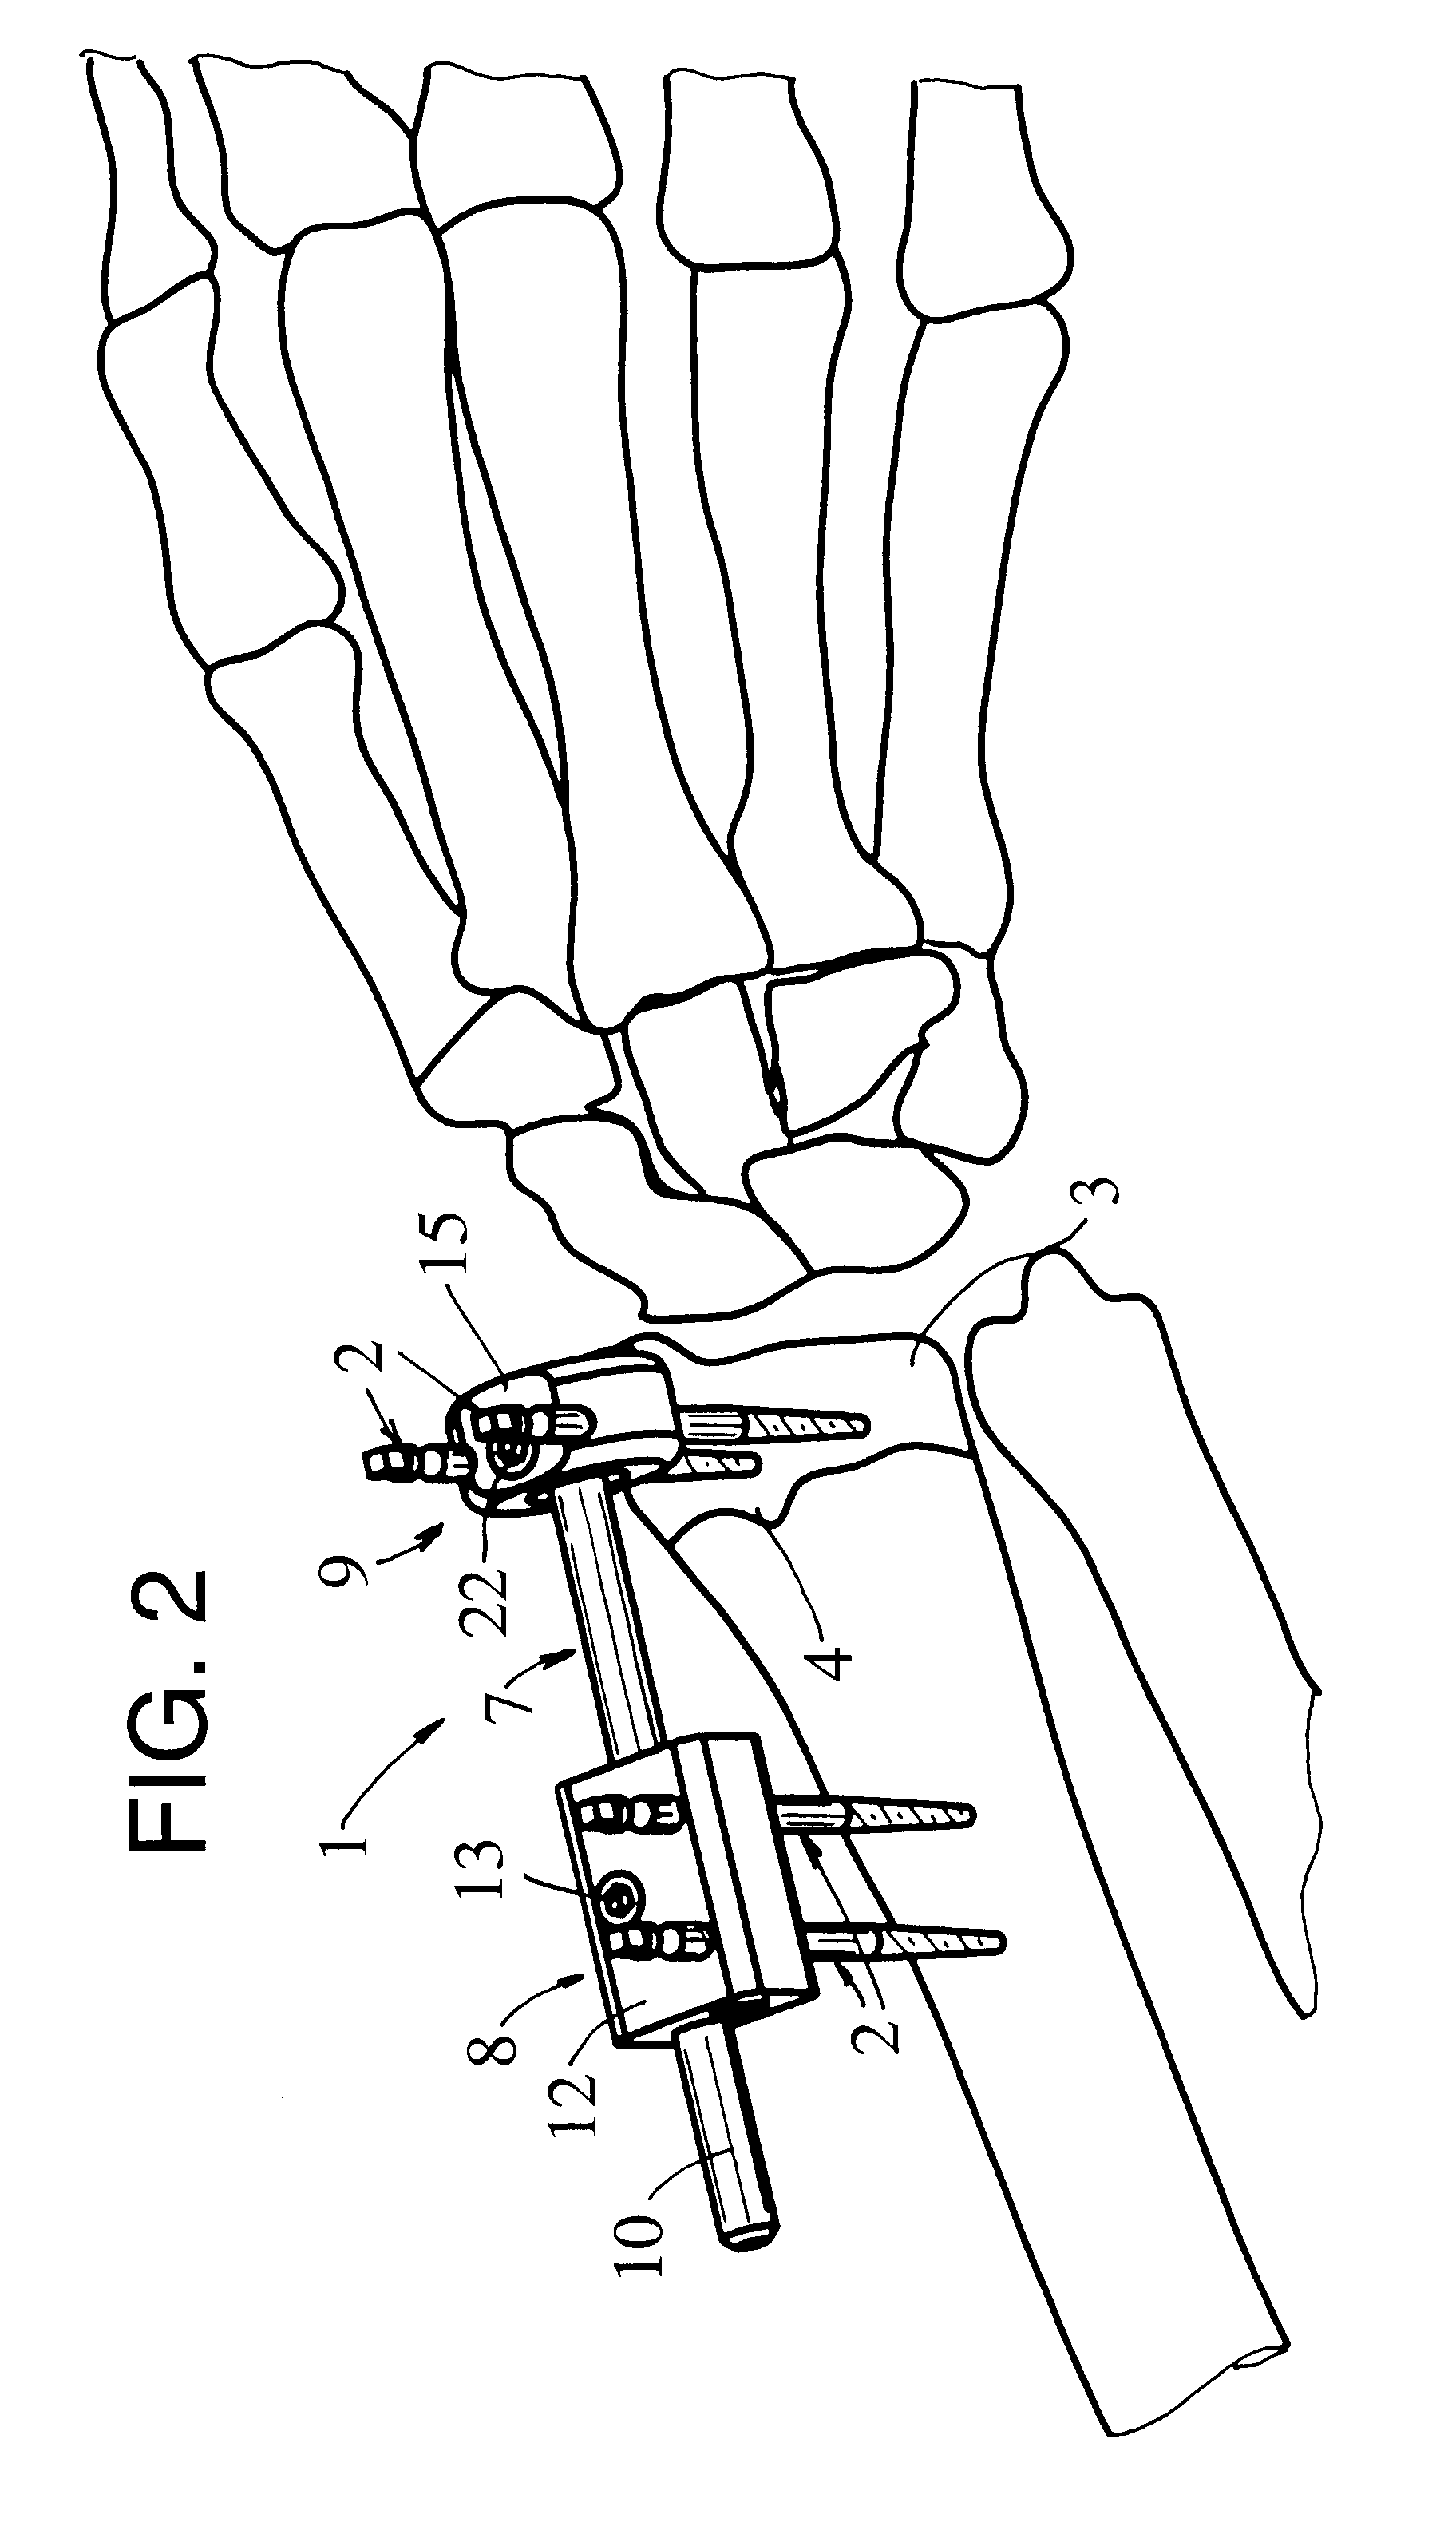 External fixator for immobilizing bone fragments, particularly in the area of the wrist